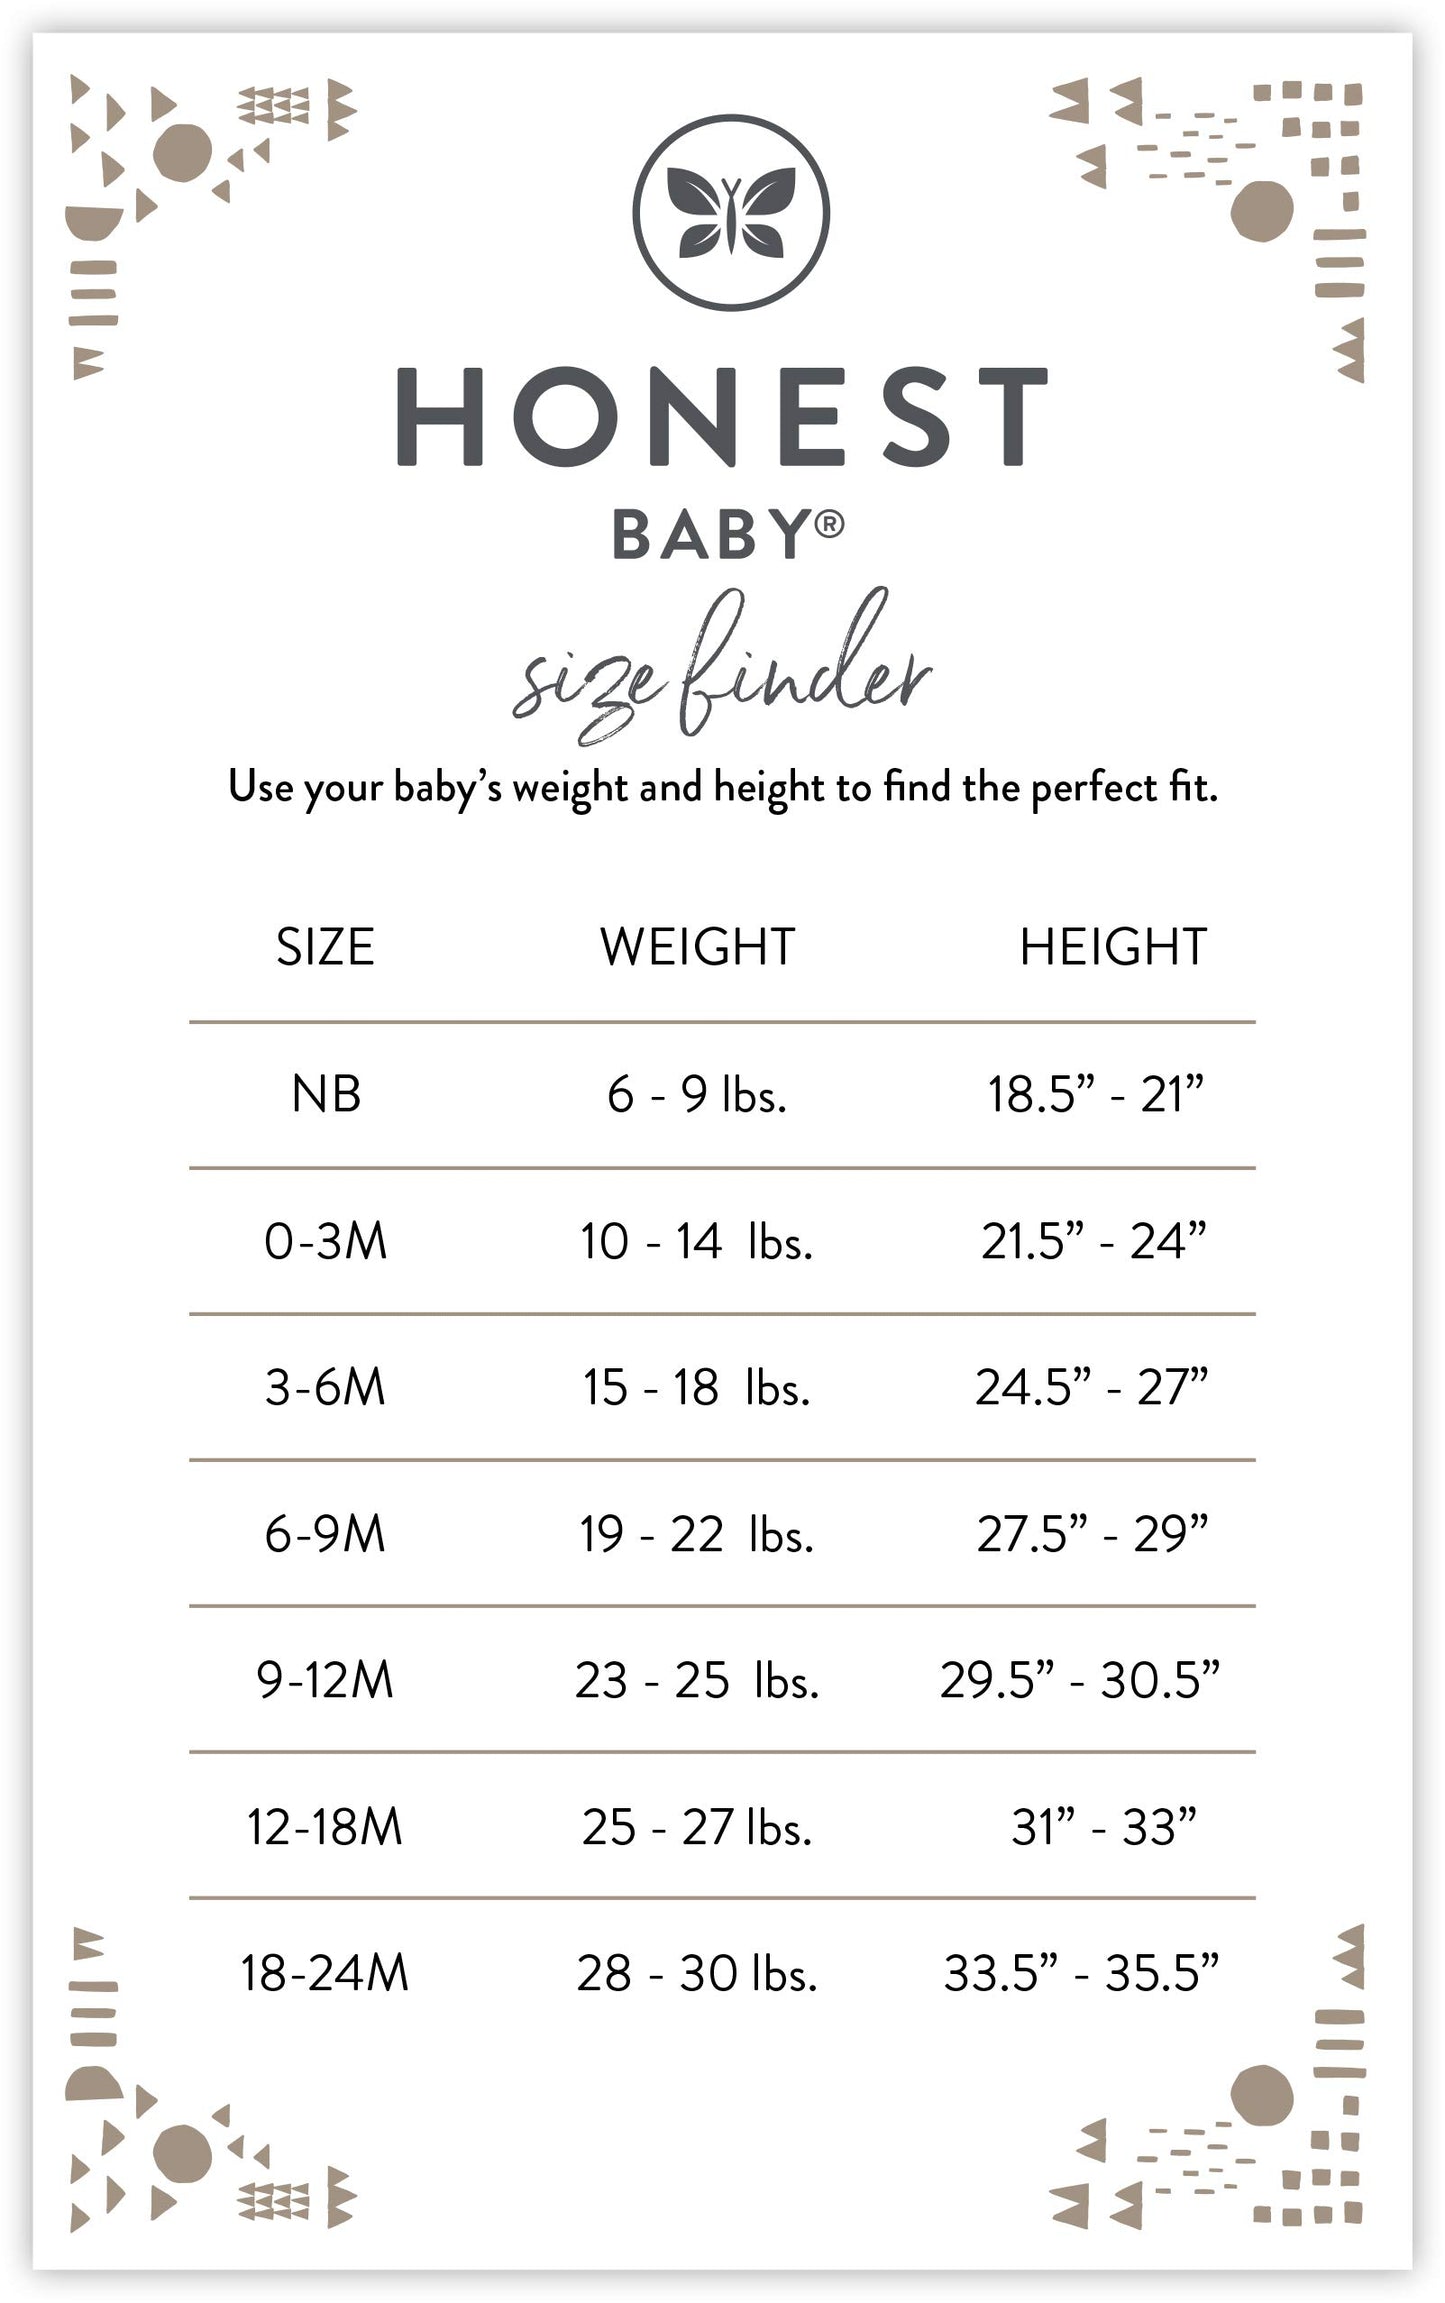 HonestBaby 10-Pack Short Sleeve Bodysuits One-Piece 100% Organic Cotton for Infant Baby Boys, Girls, Unisex, Rainbow Girl, 0-3 Months